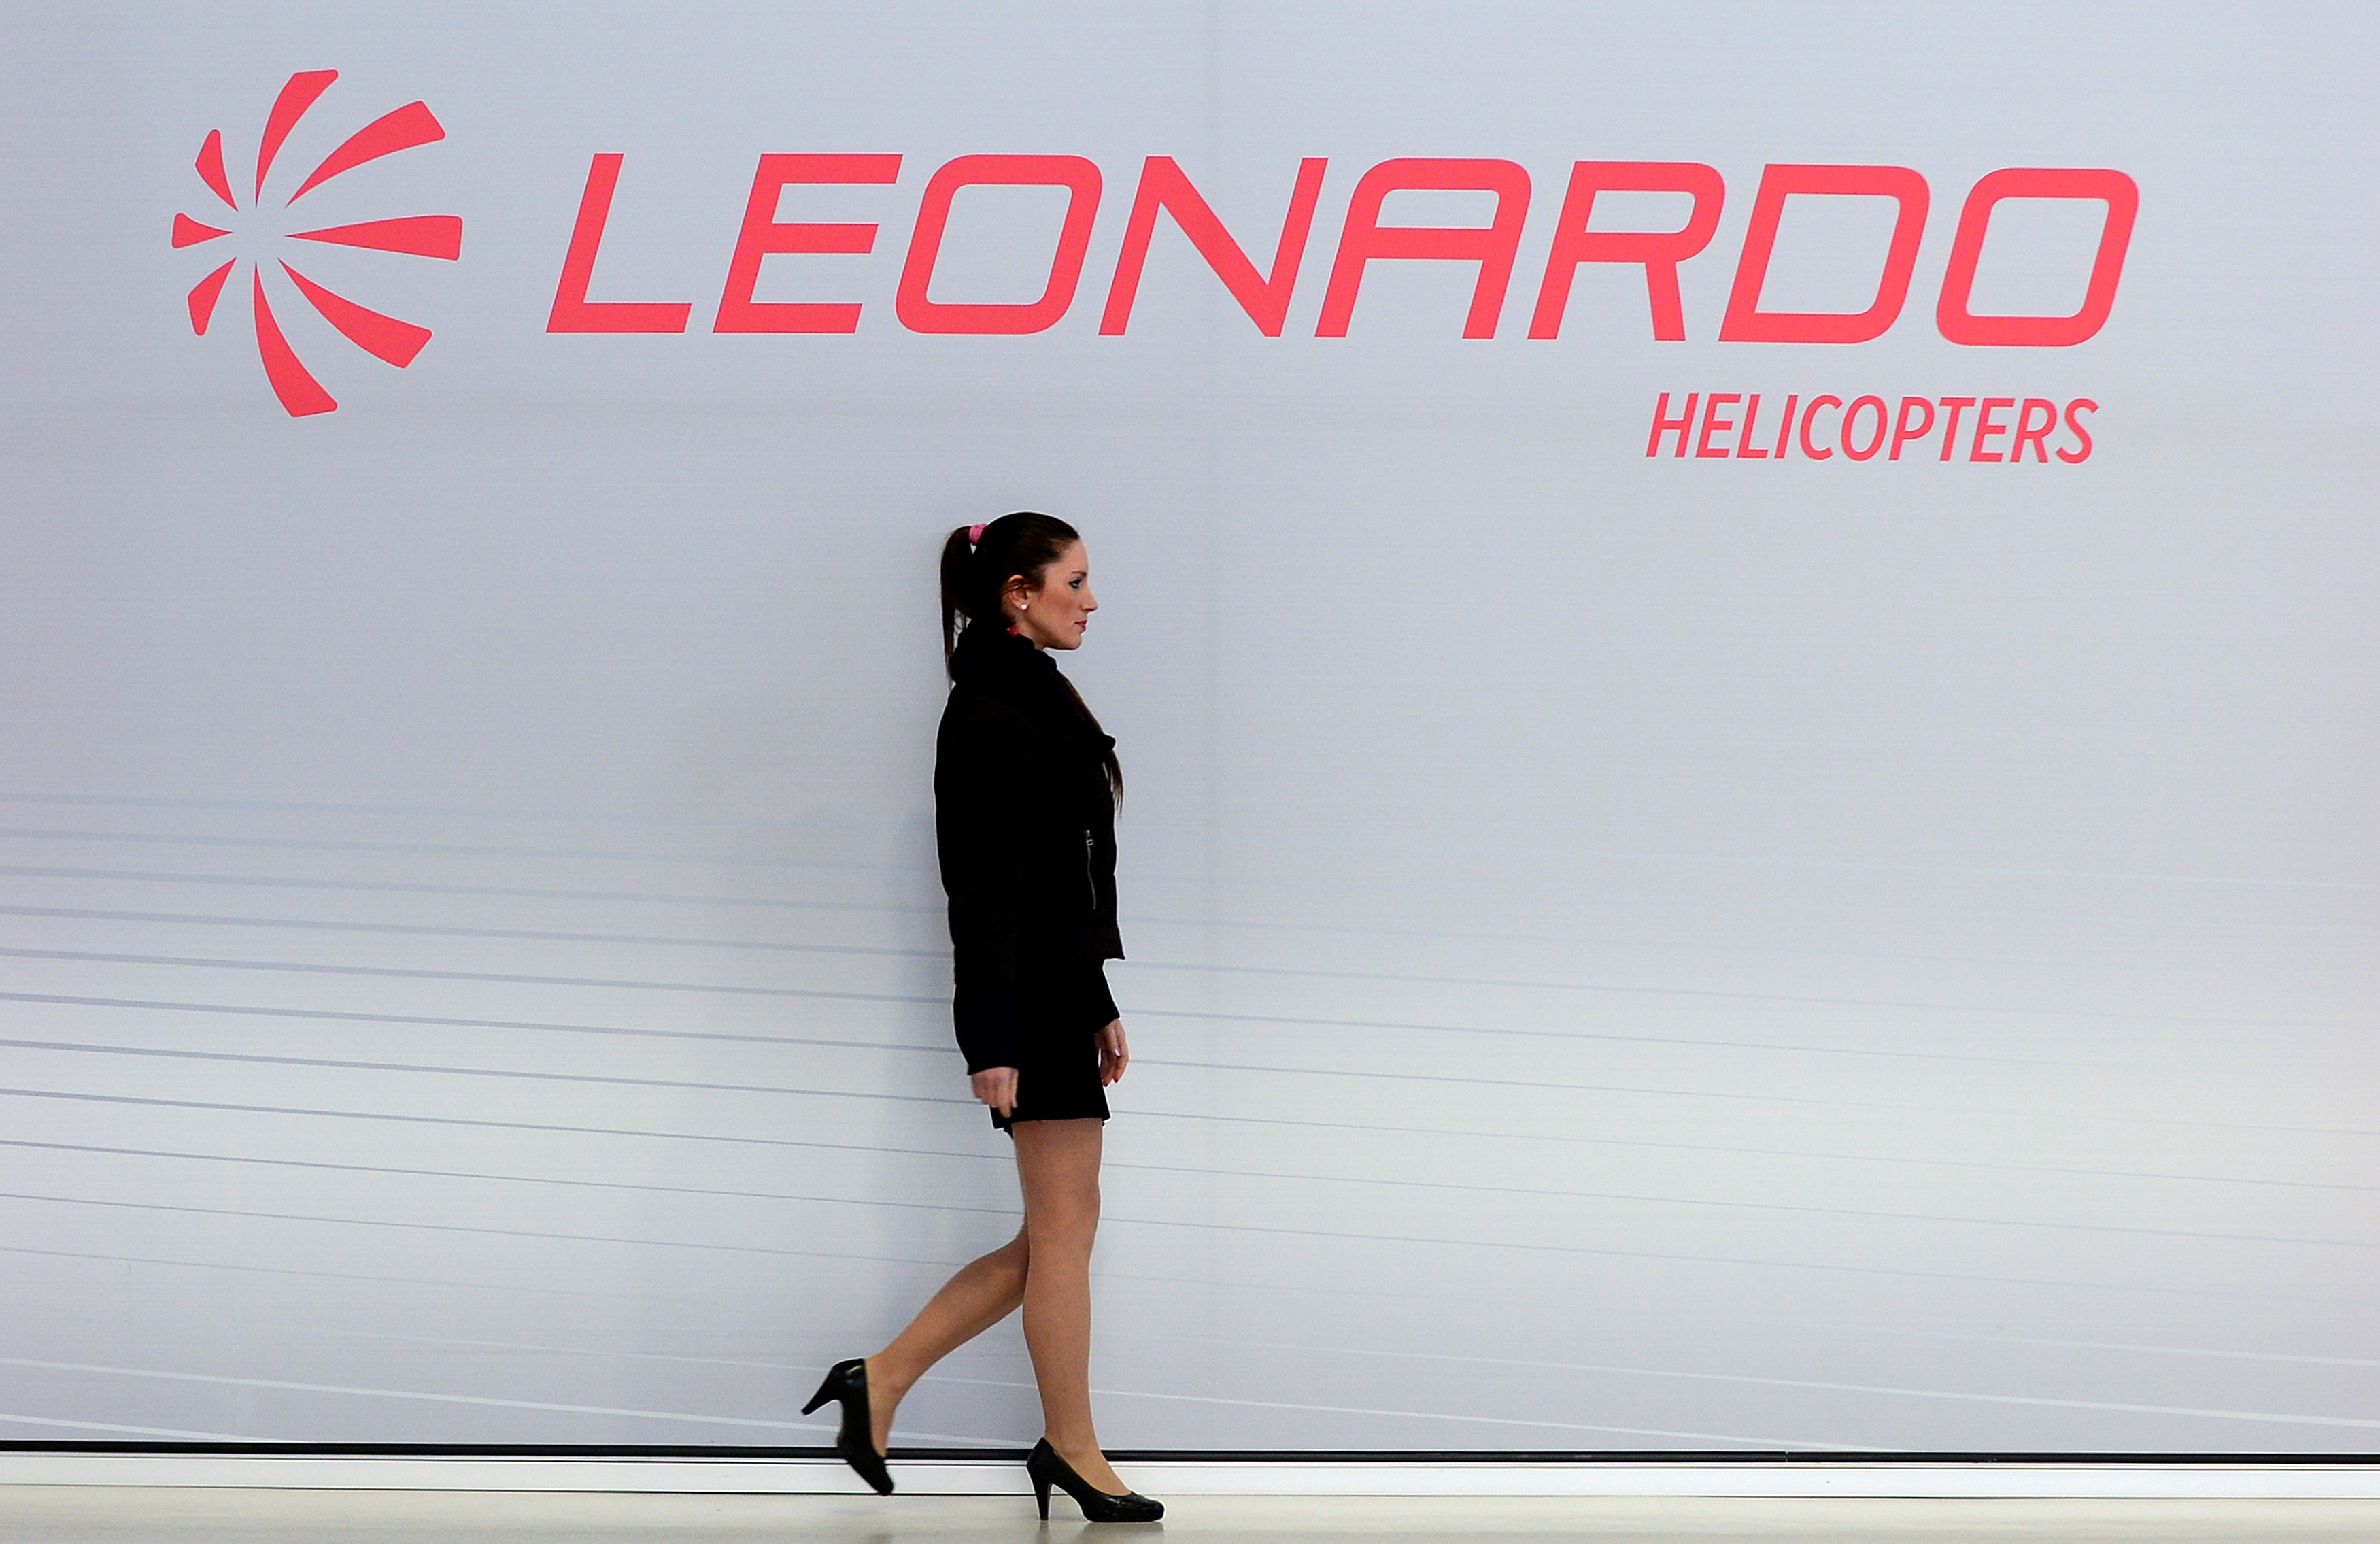 A hostess walks past a Leonardo's helicopters logo at the headquarters in Vergiate